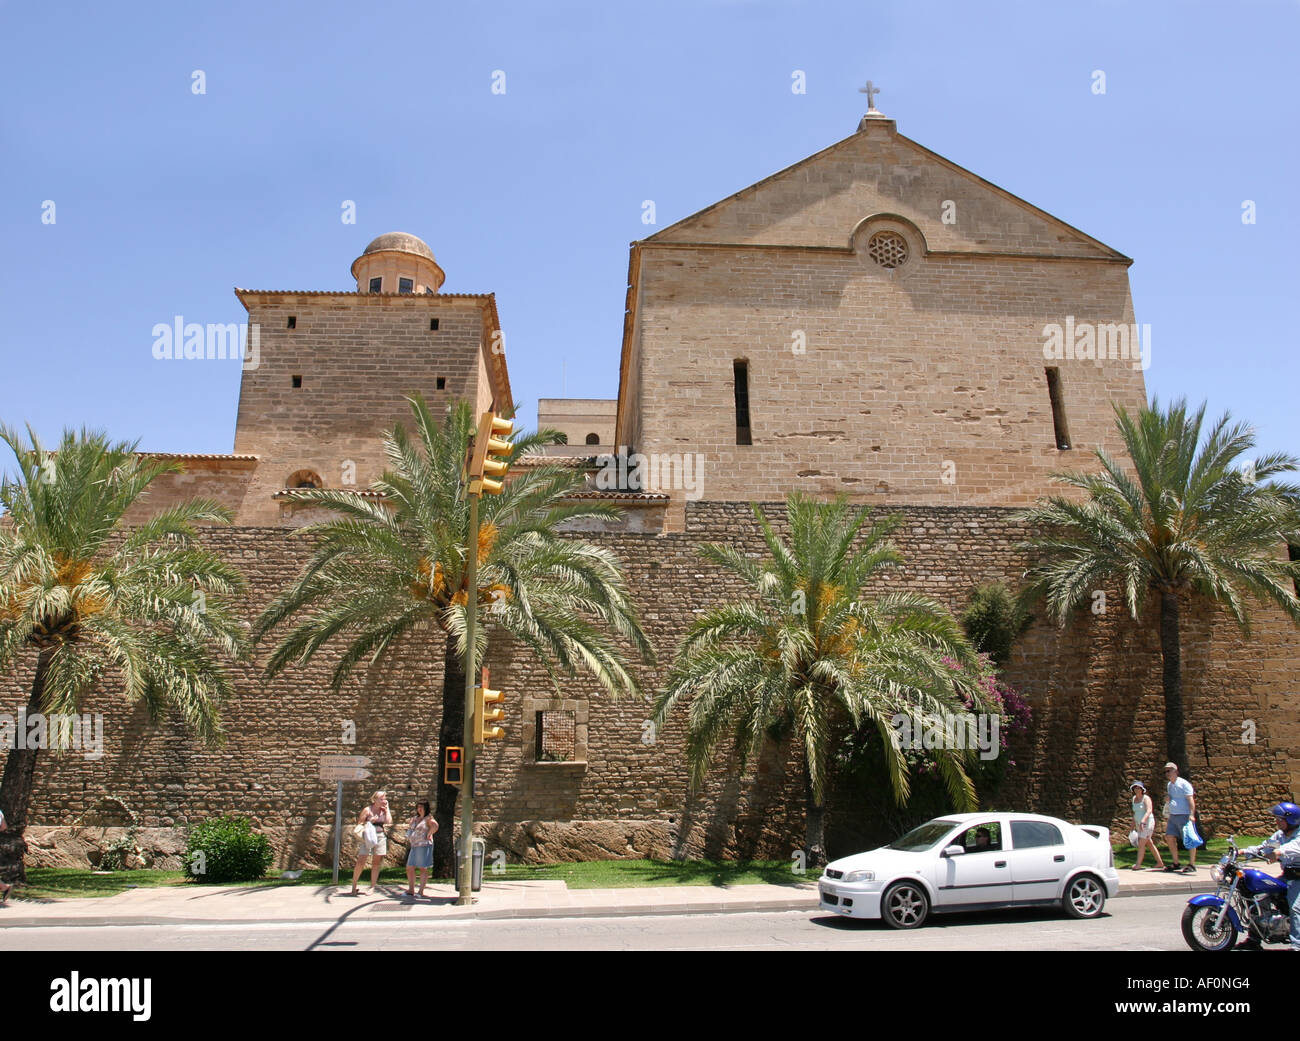 The Sant Jaume church at the old town of Alcudia Mallorca Spain The church was built in 1892 by architect Joaquin de Pavia Stock Photo